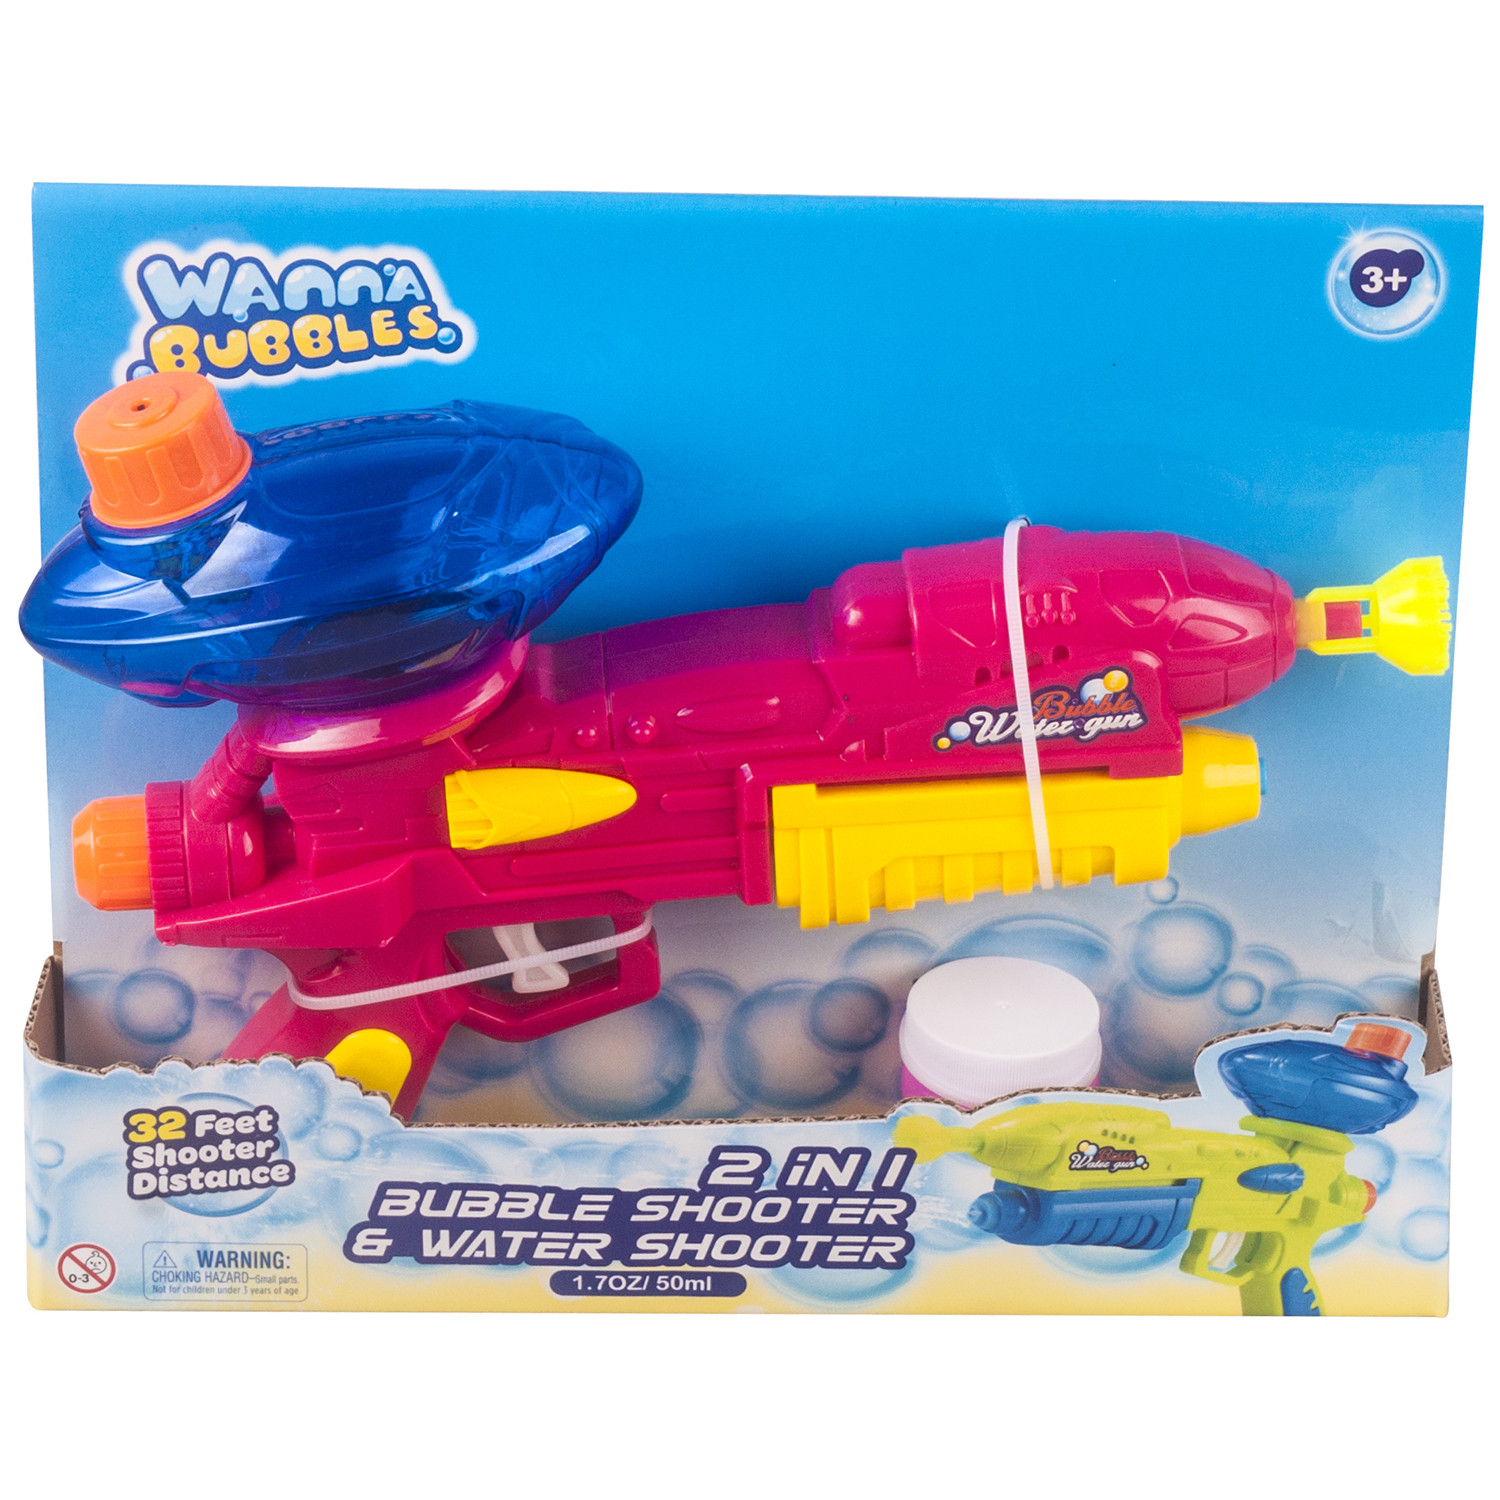 2-in-1 Bubble and Water Shooter Image 3